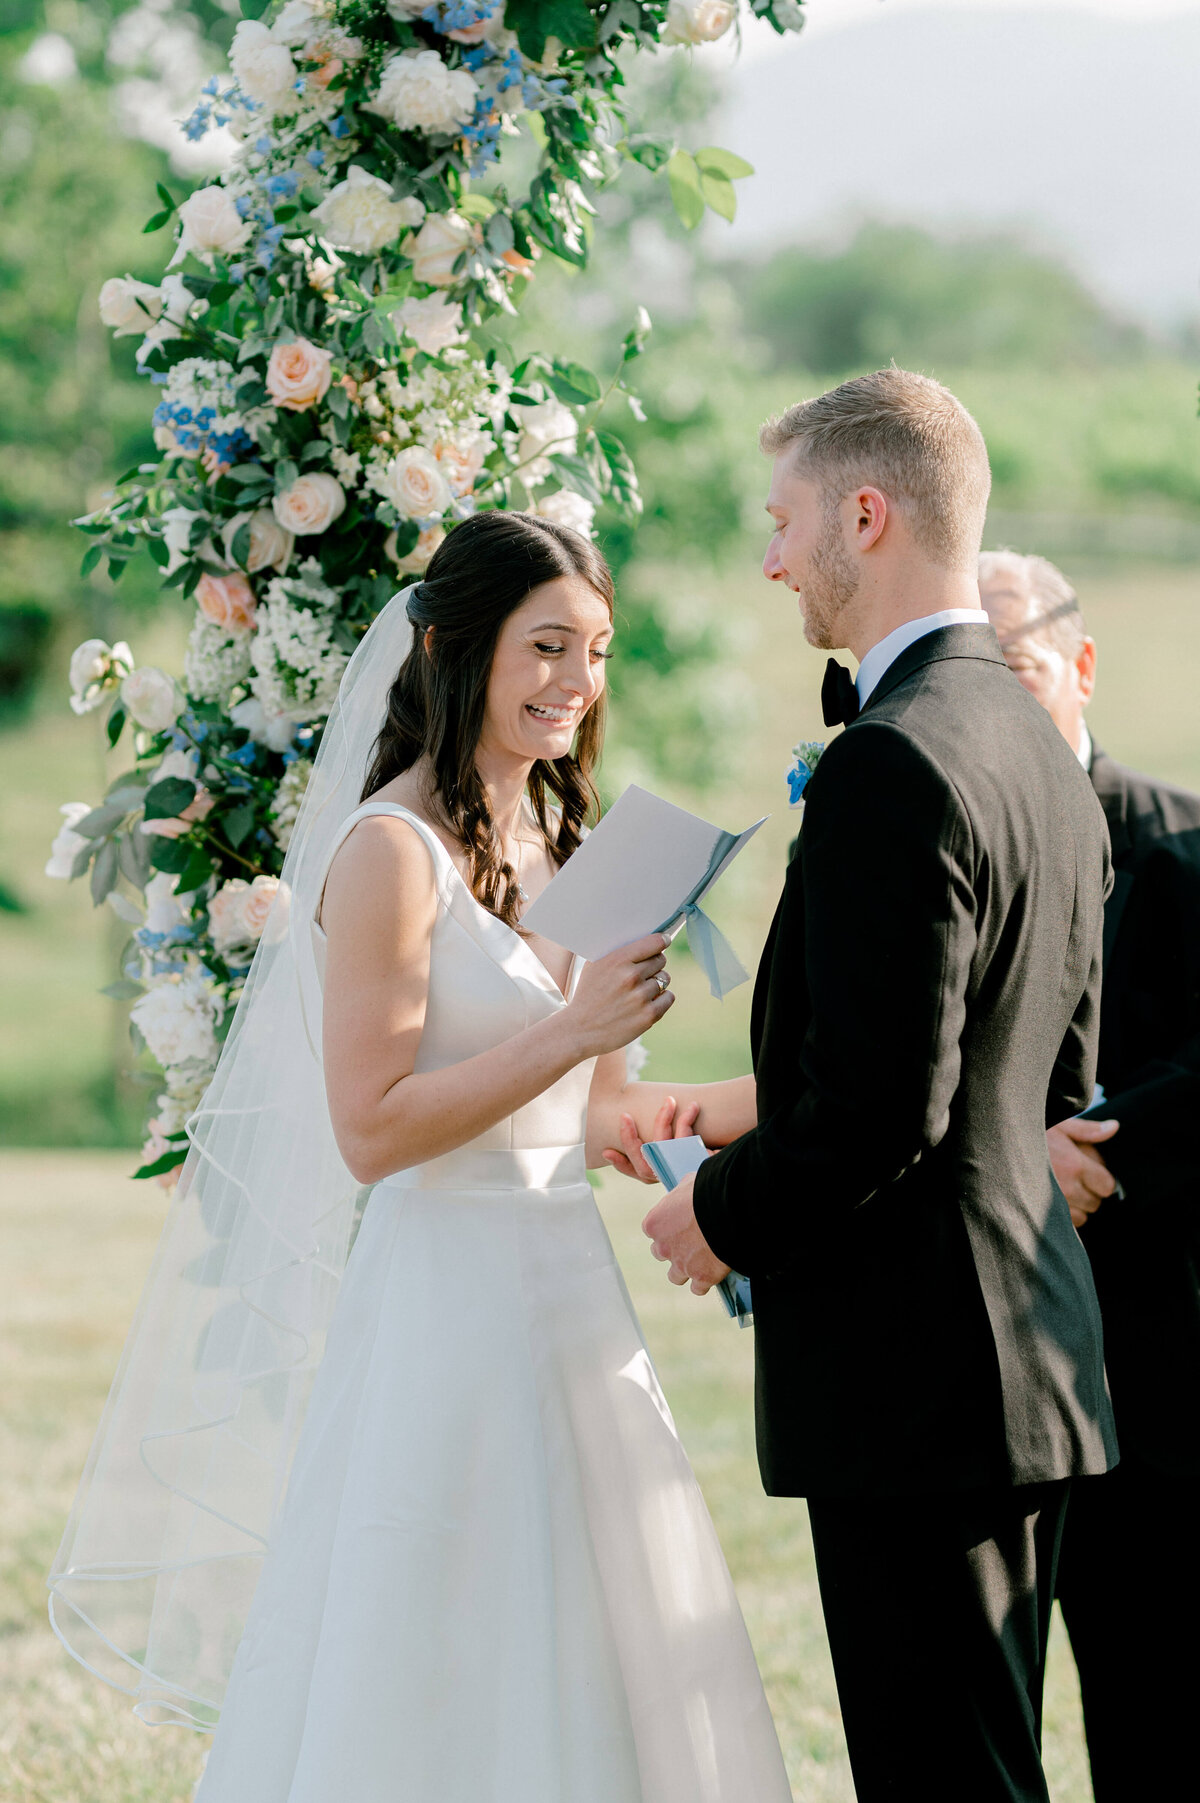 Bride happily reading her vows to her groom during their wedding ceremony